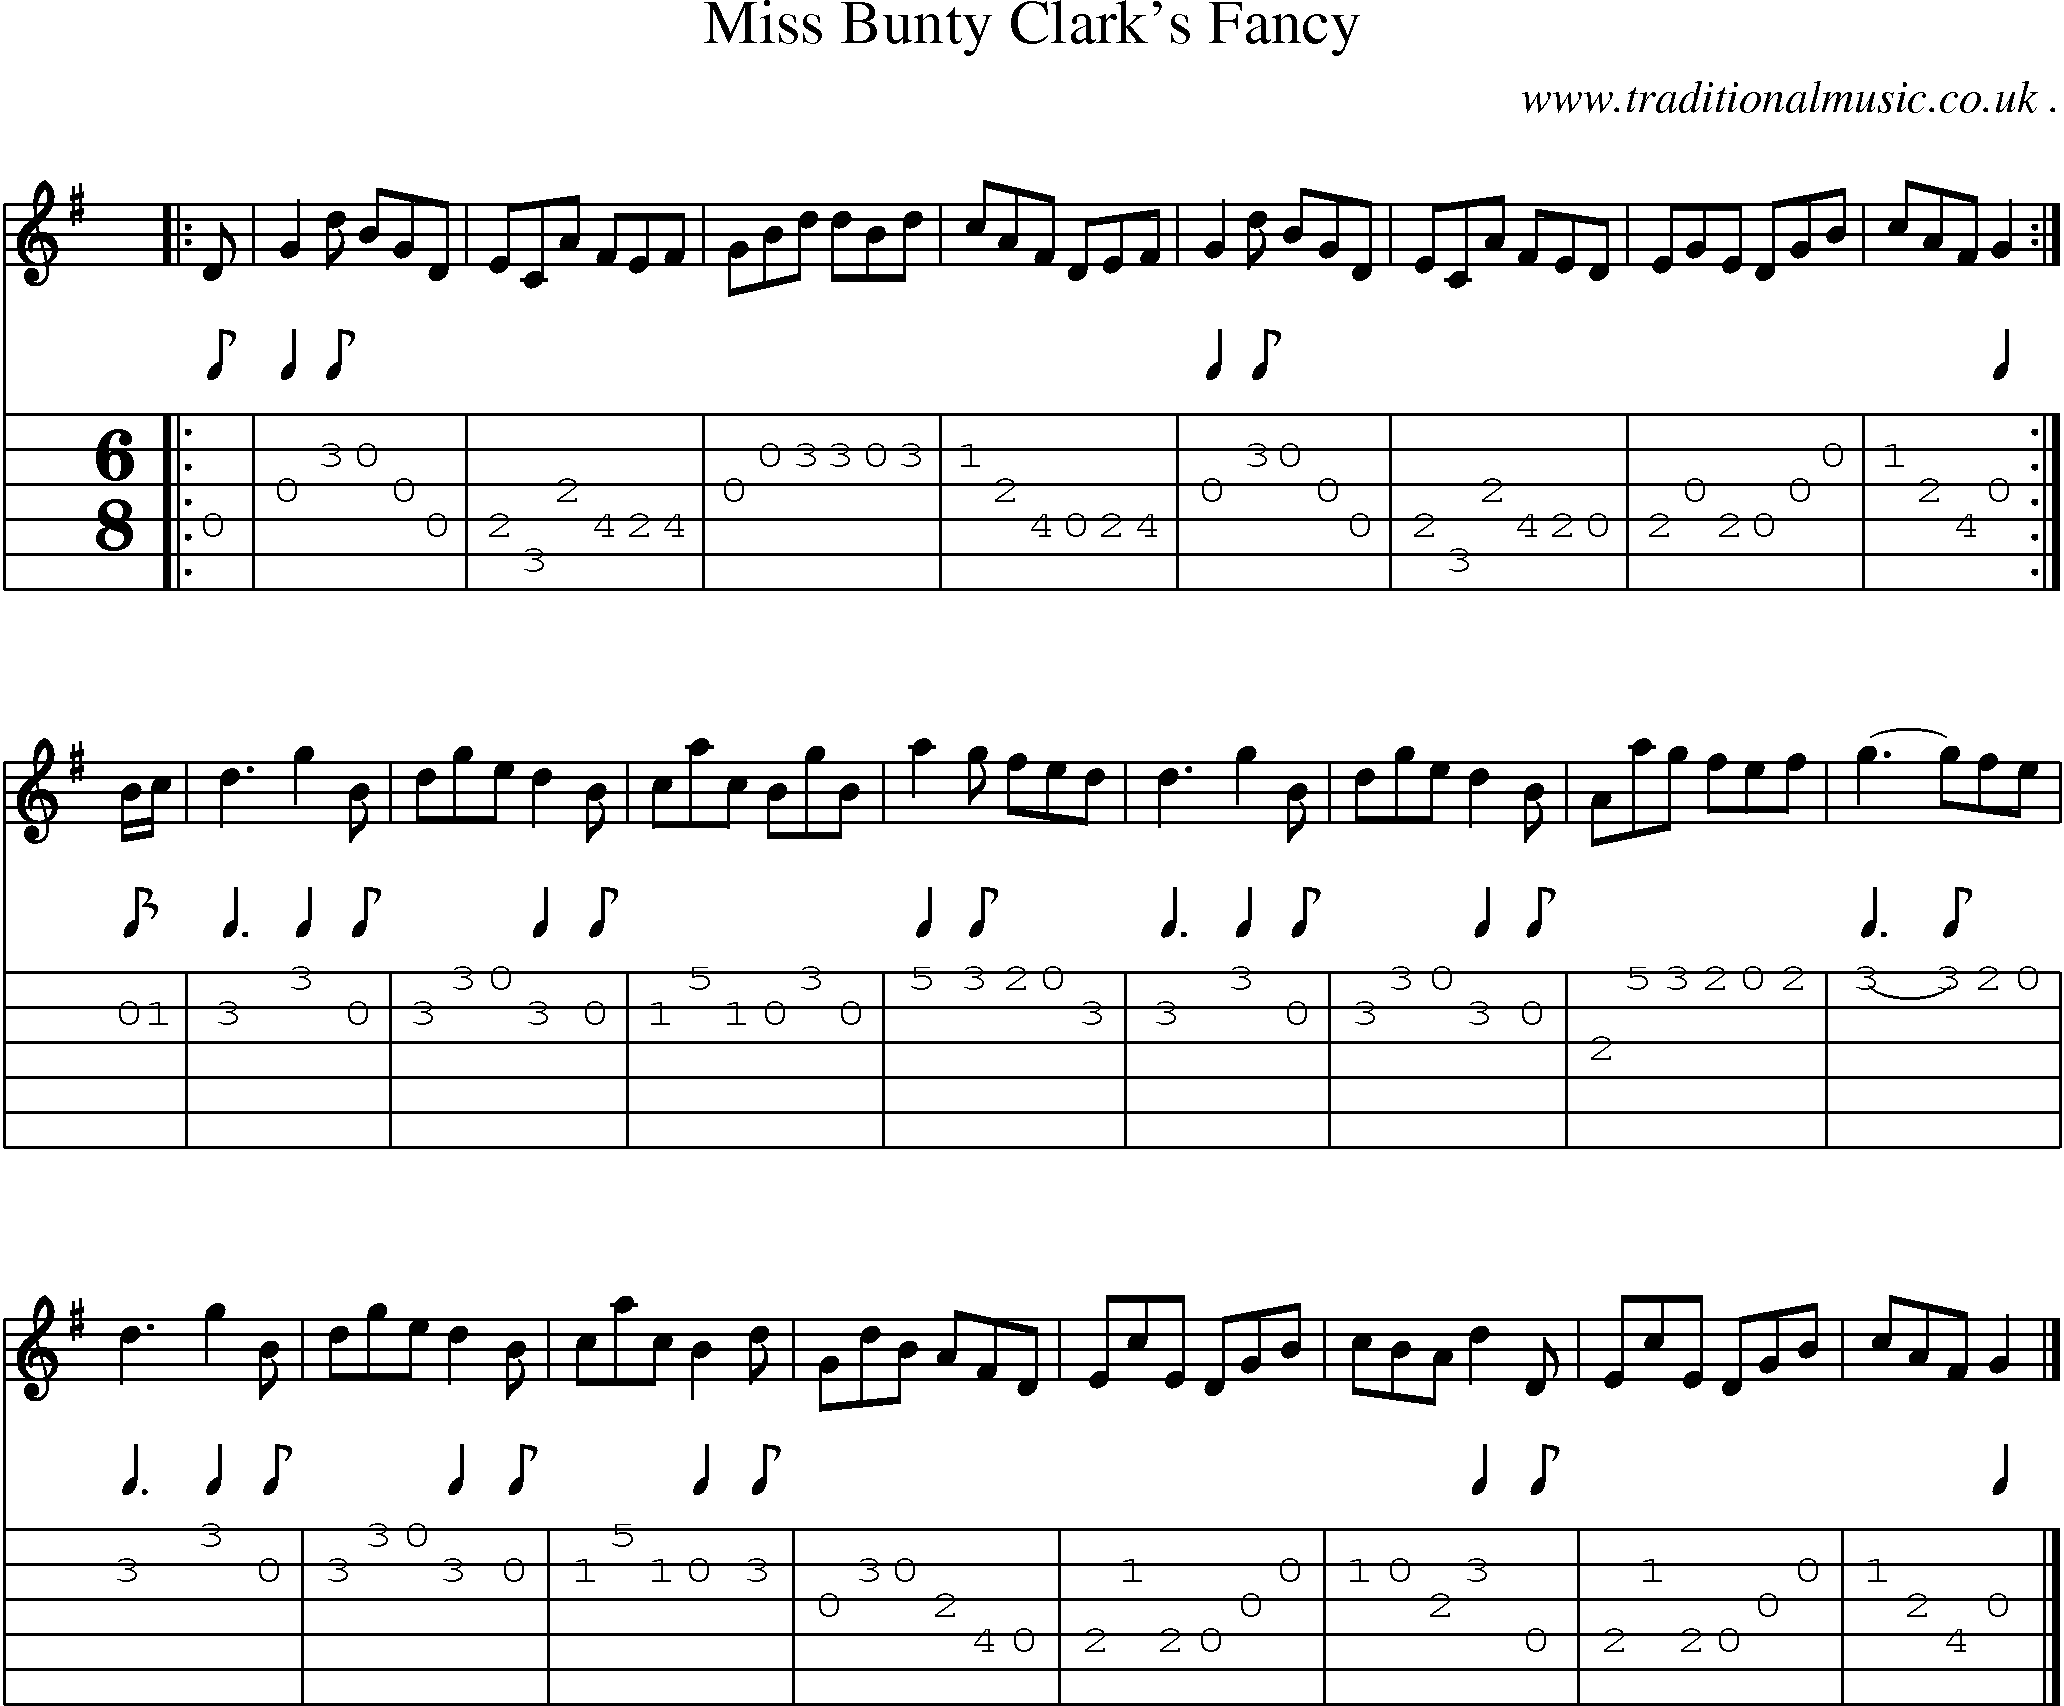 Sheet-music  score, Chords and Guitar Tabs for Miss Bunty Clarks Fancy